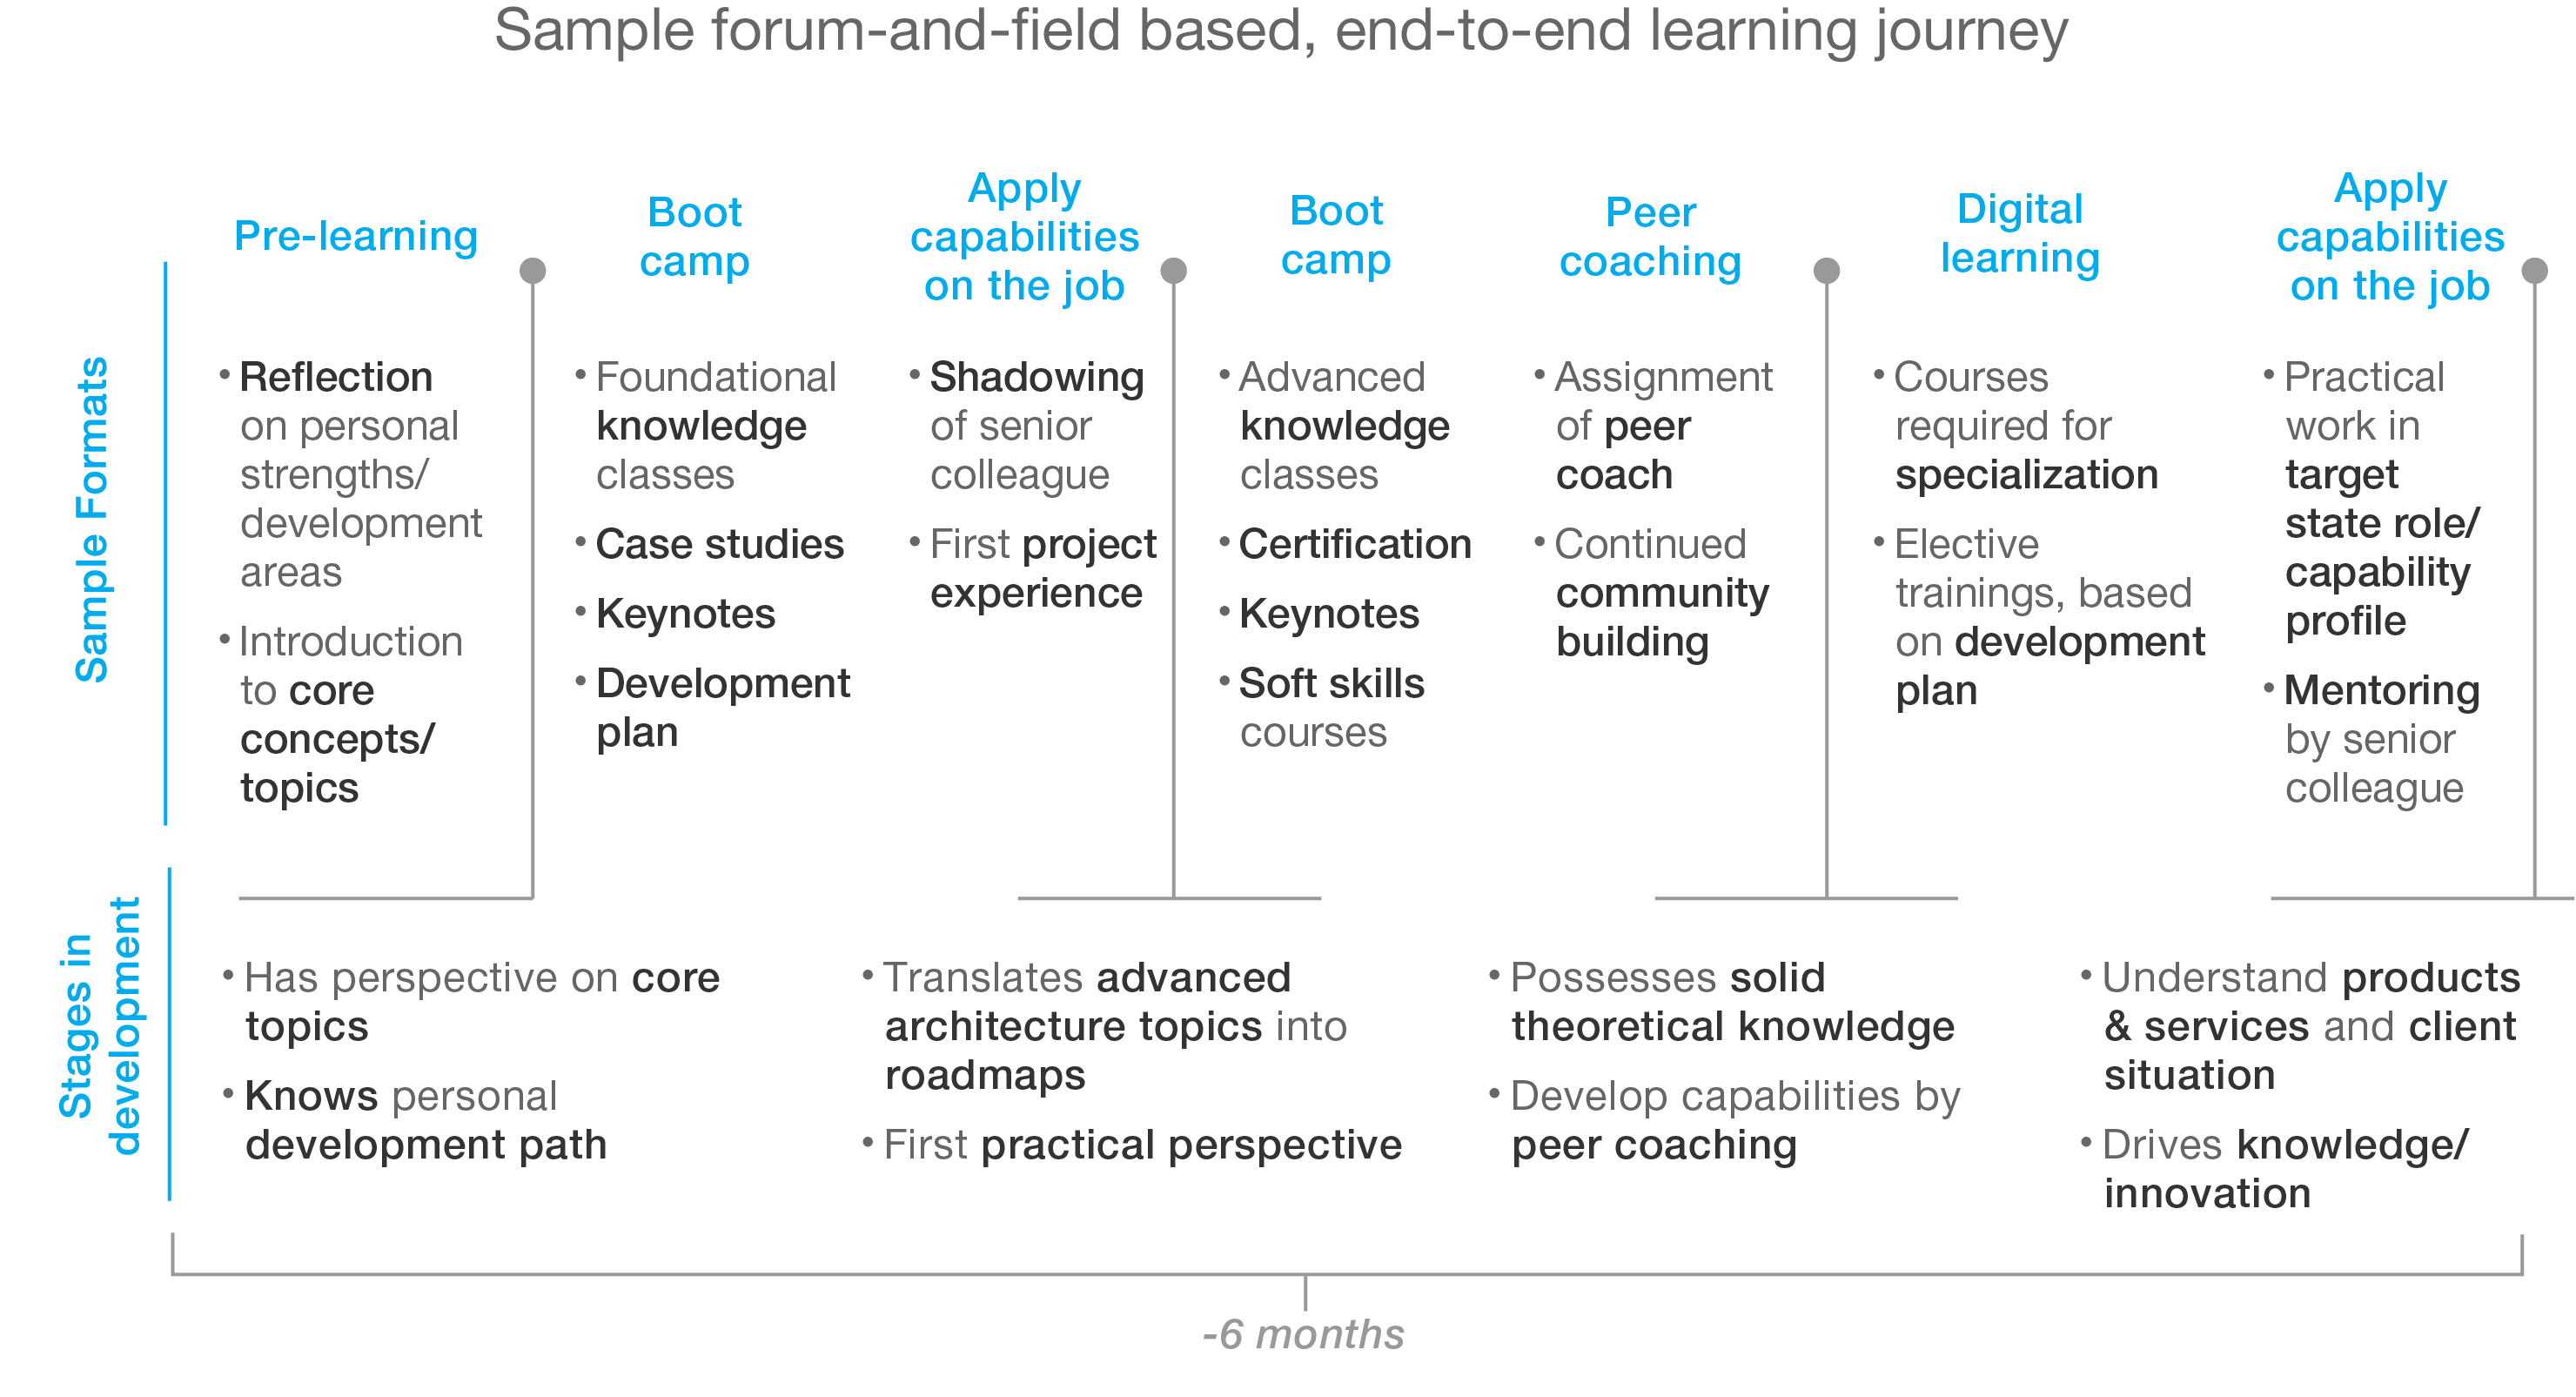 Sample forum-and-field based end-to-end learning journey